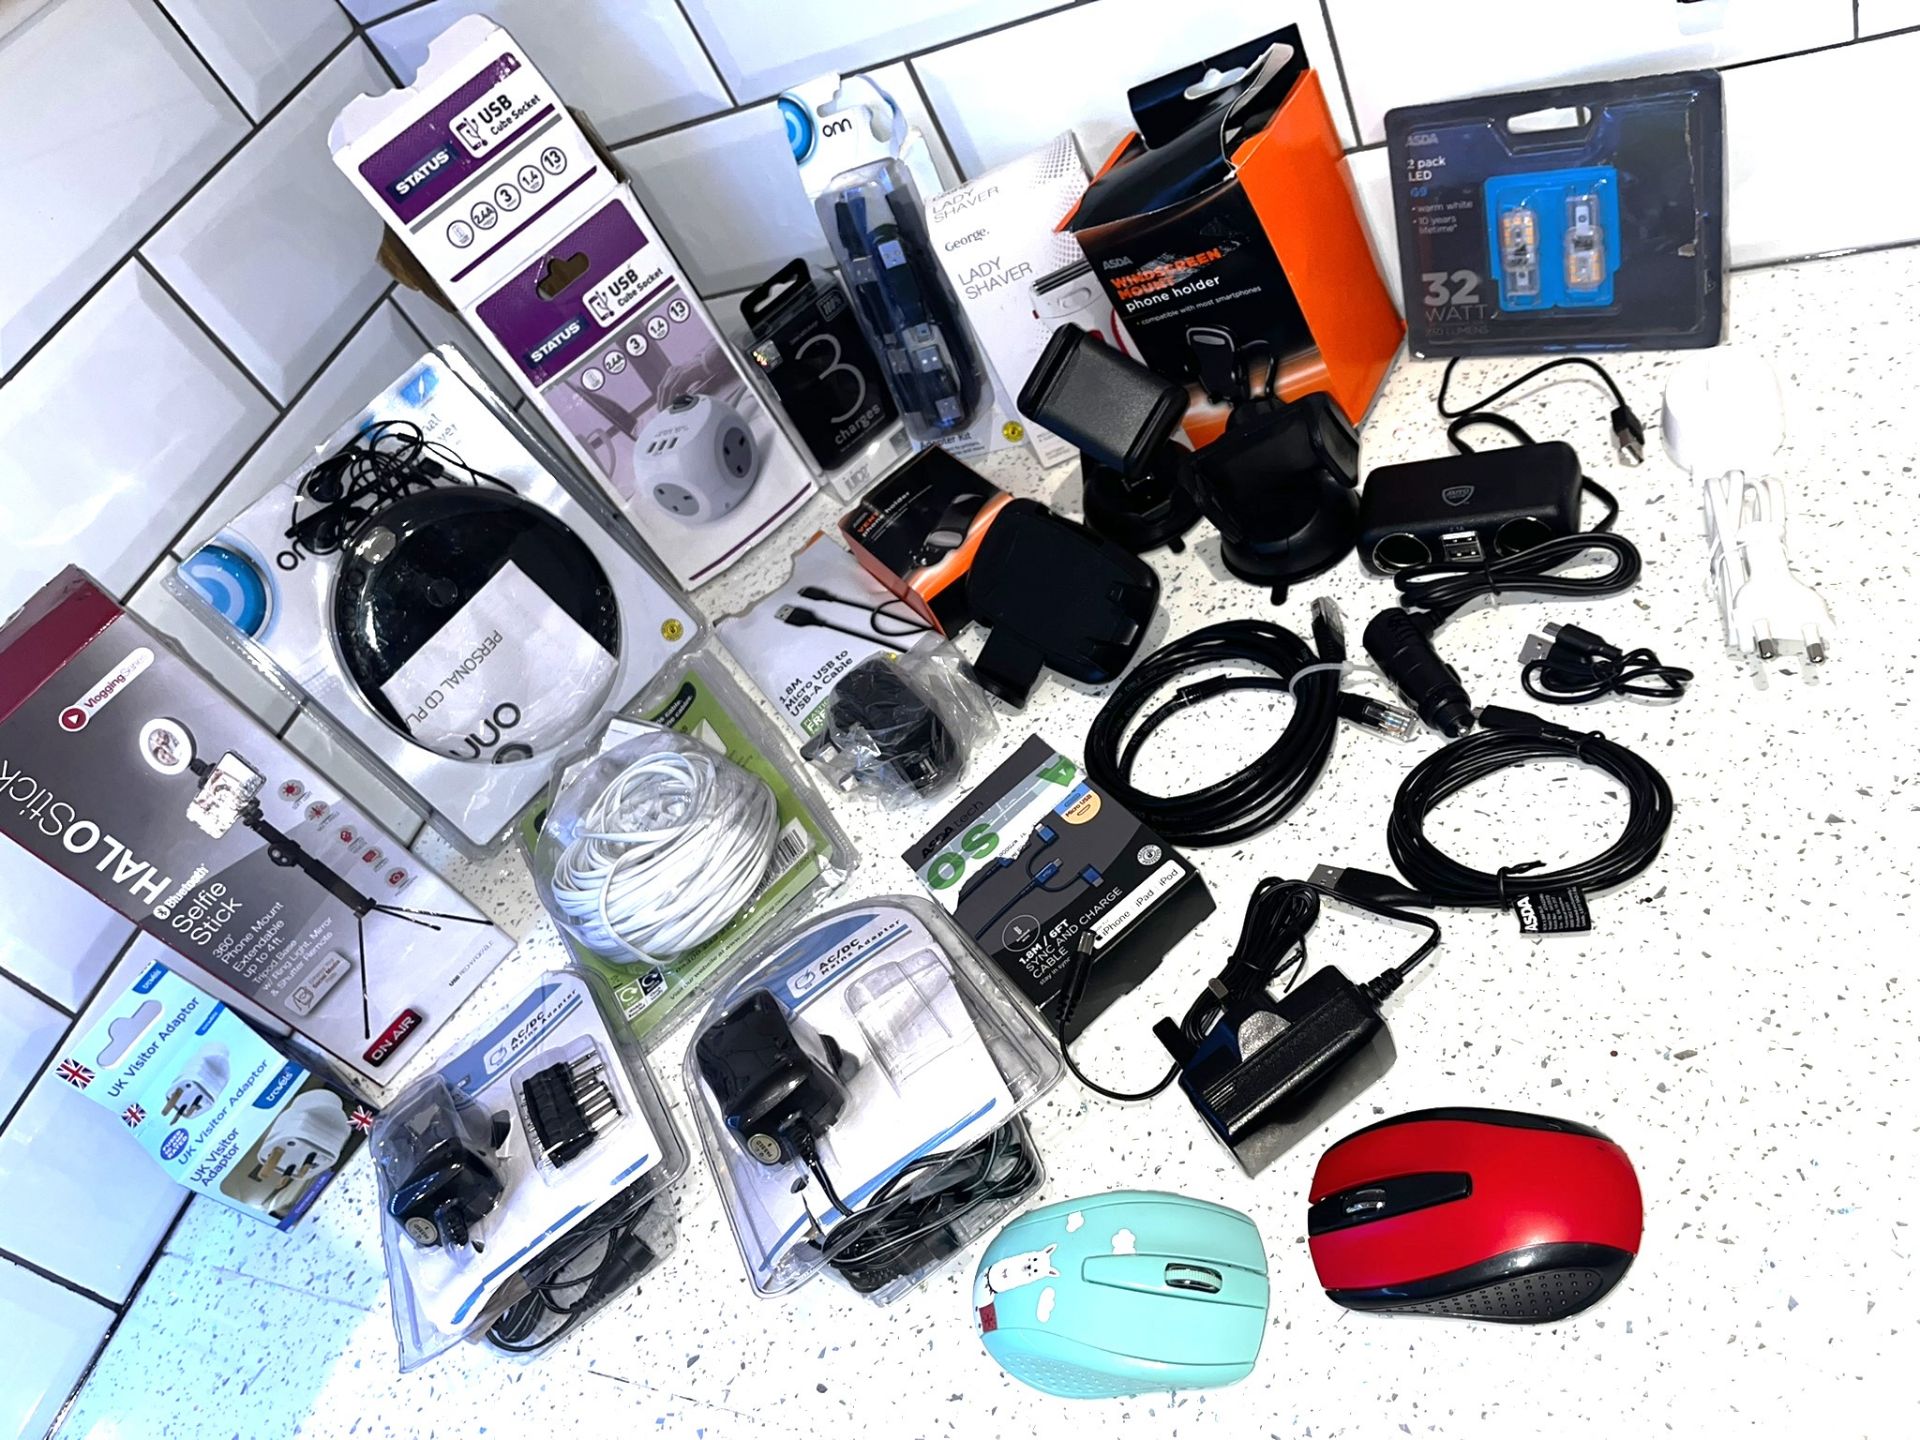 Untested Electrical Items - Selfie Stick, CD Player, Battery Bank, Bulbs, Phone Cradles, Mouses +